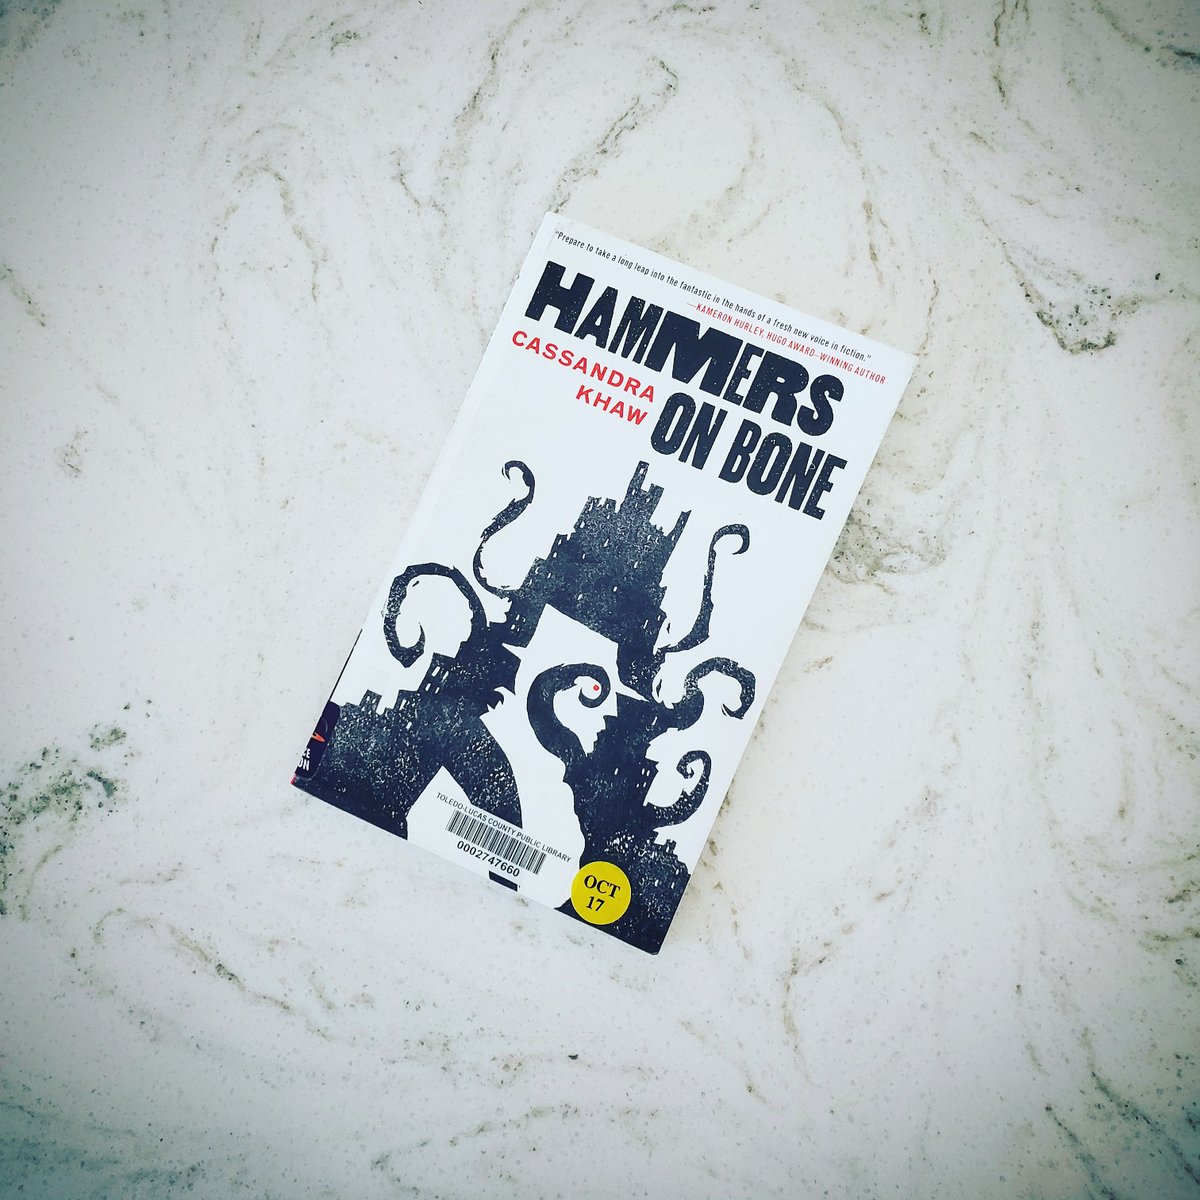 Hammers on Bone by Cassandra Khaw This little book packs a punch in just 72 pages. Think detective noir meets Lovecraft's The Call of Cthulhu. There's plenty of action and cosmic horror that'll keep you reading from cover to cover. This is the first in a two-book series!